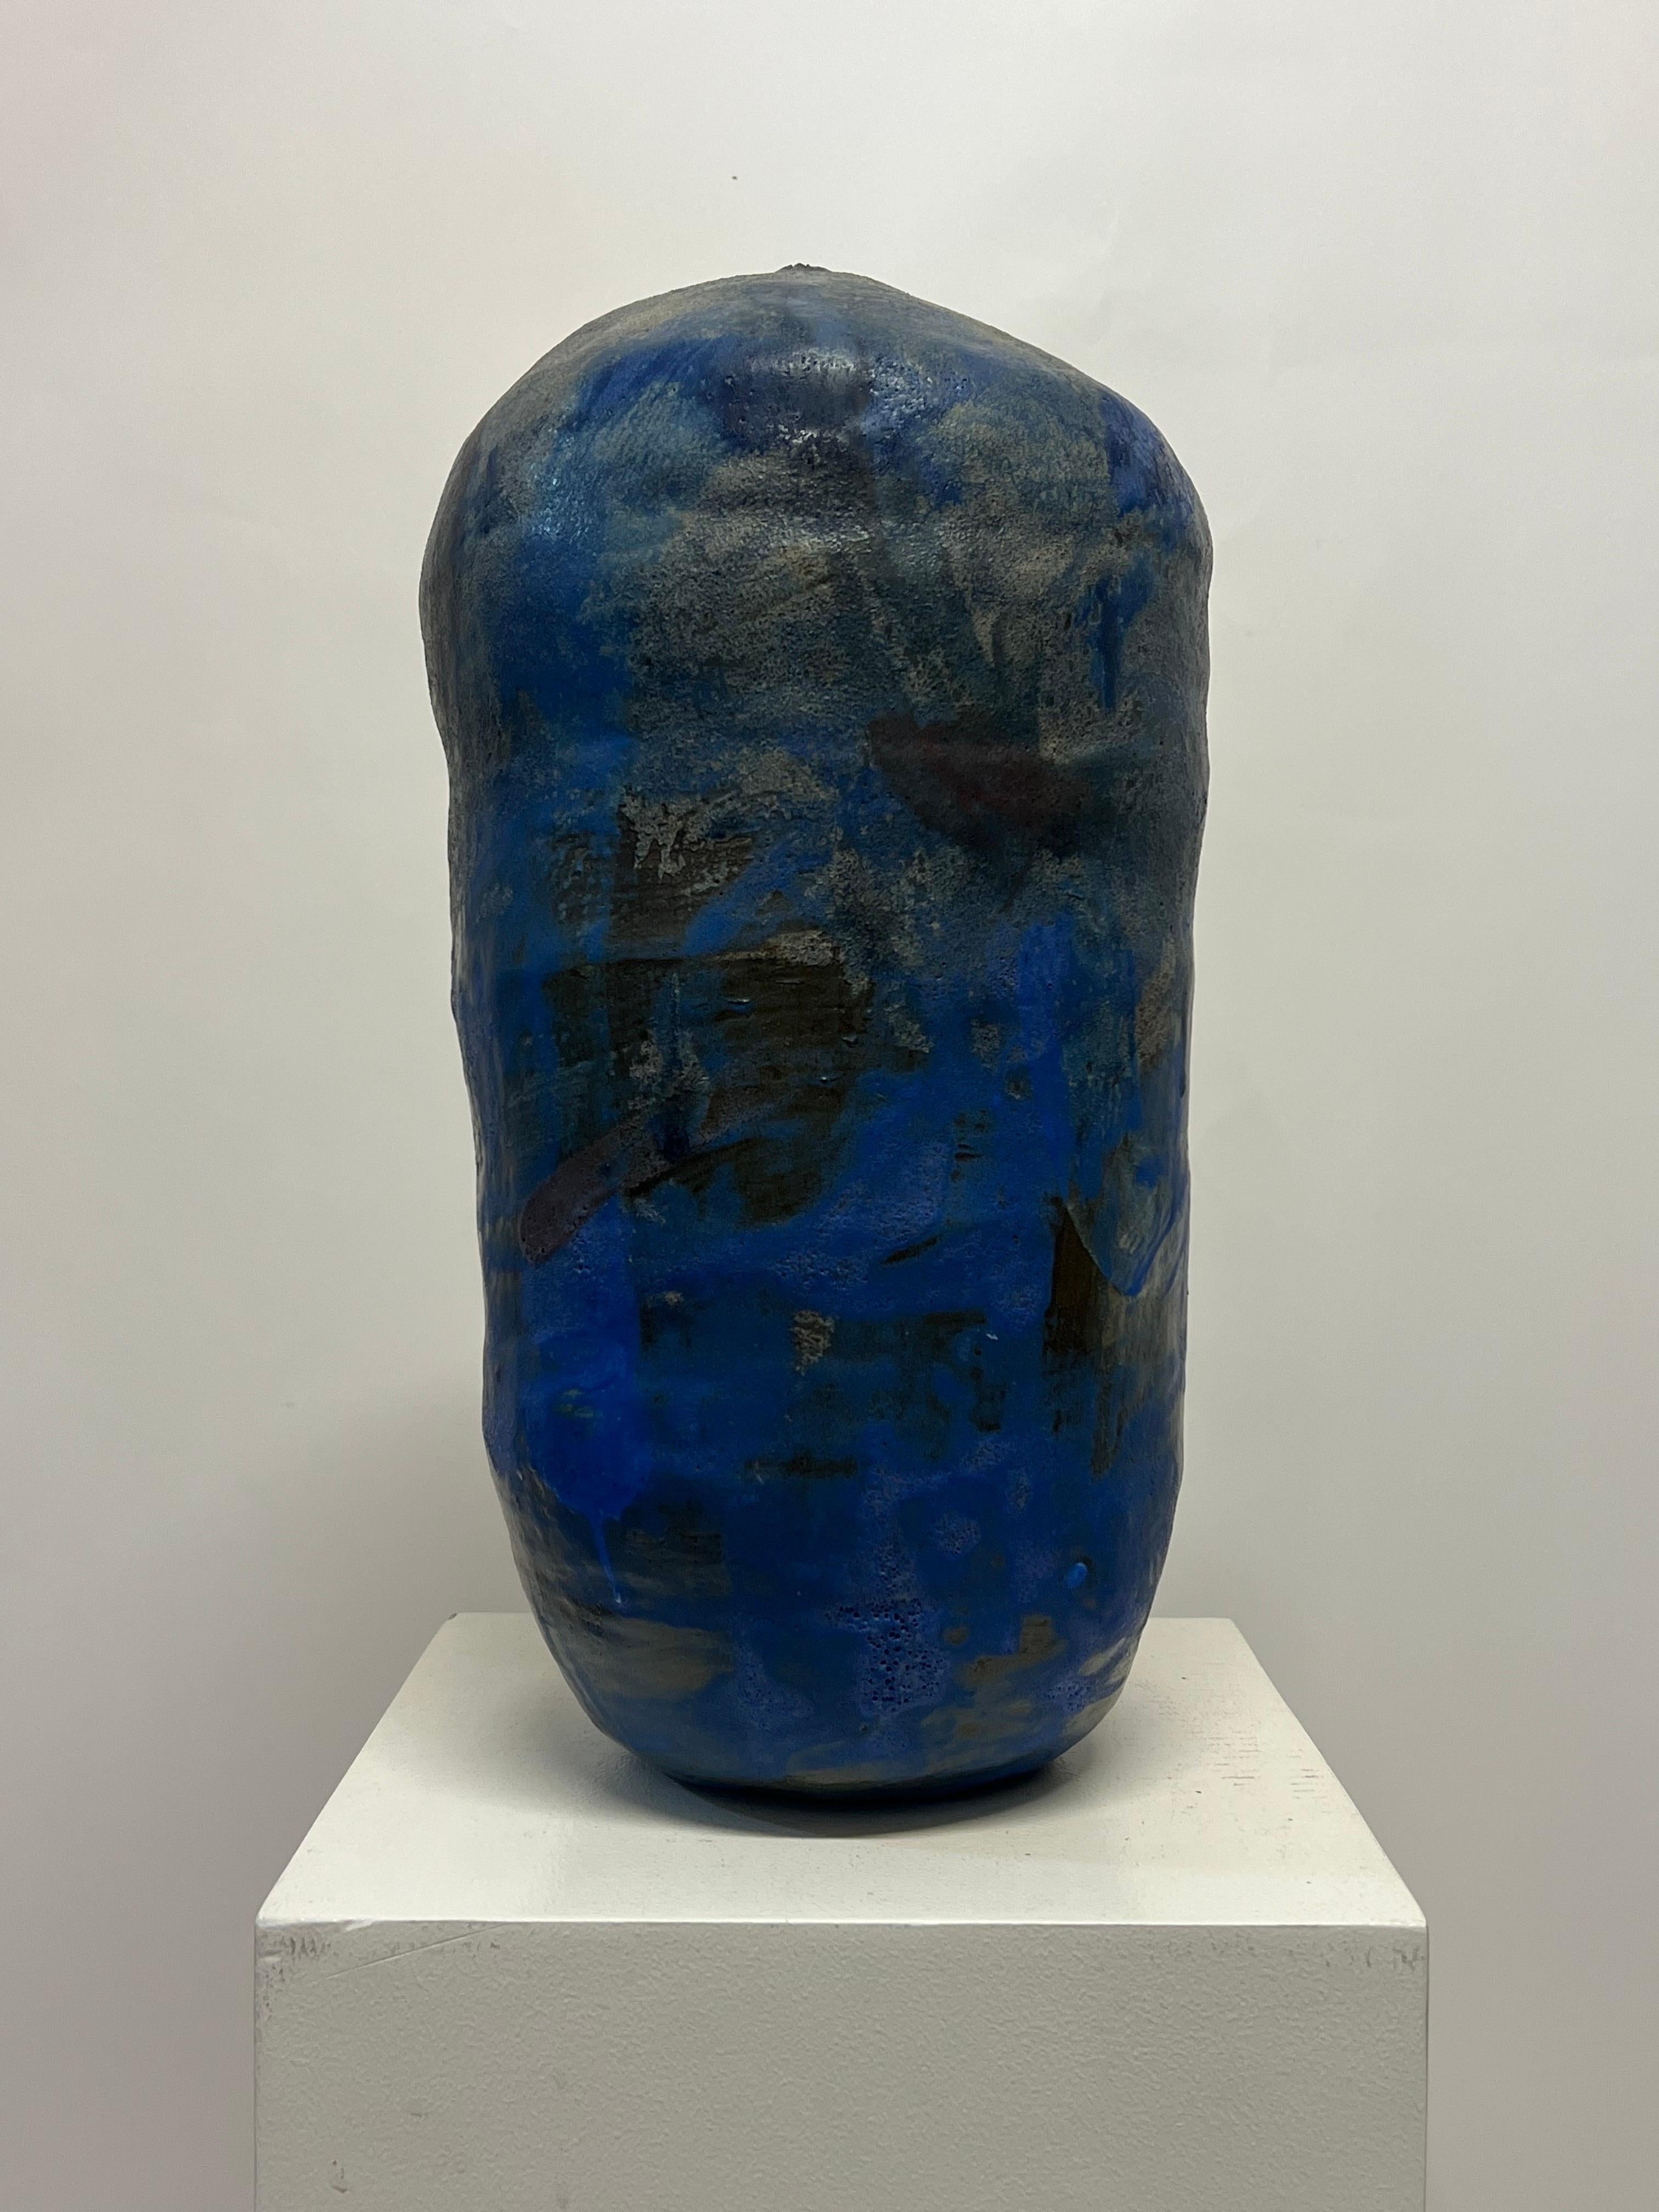 Justin Hoffman Glazed Ceramic Vessel 2021 In Excellent Condition For Sale In Oakland, CA